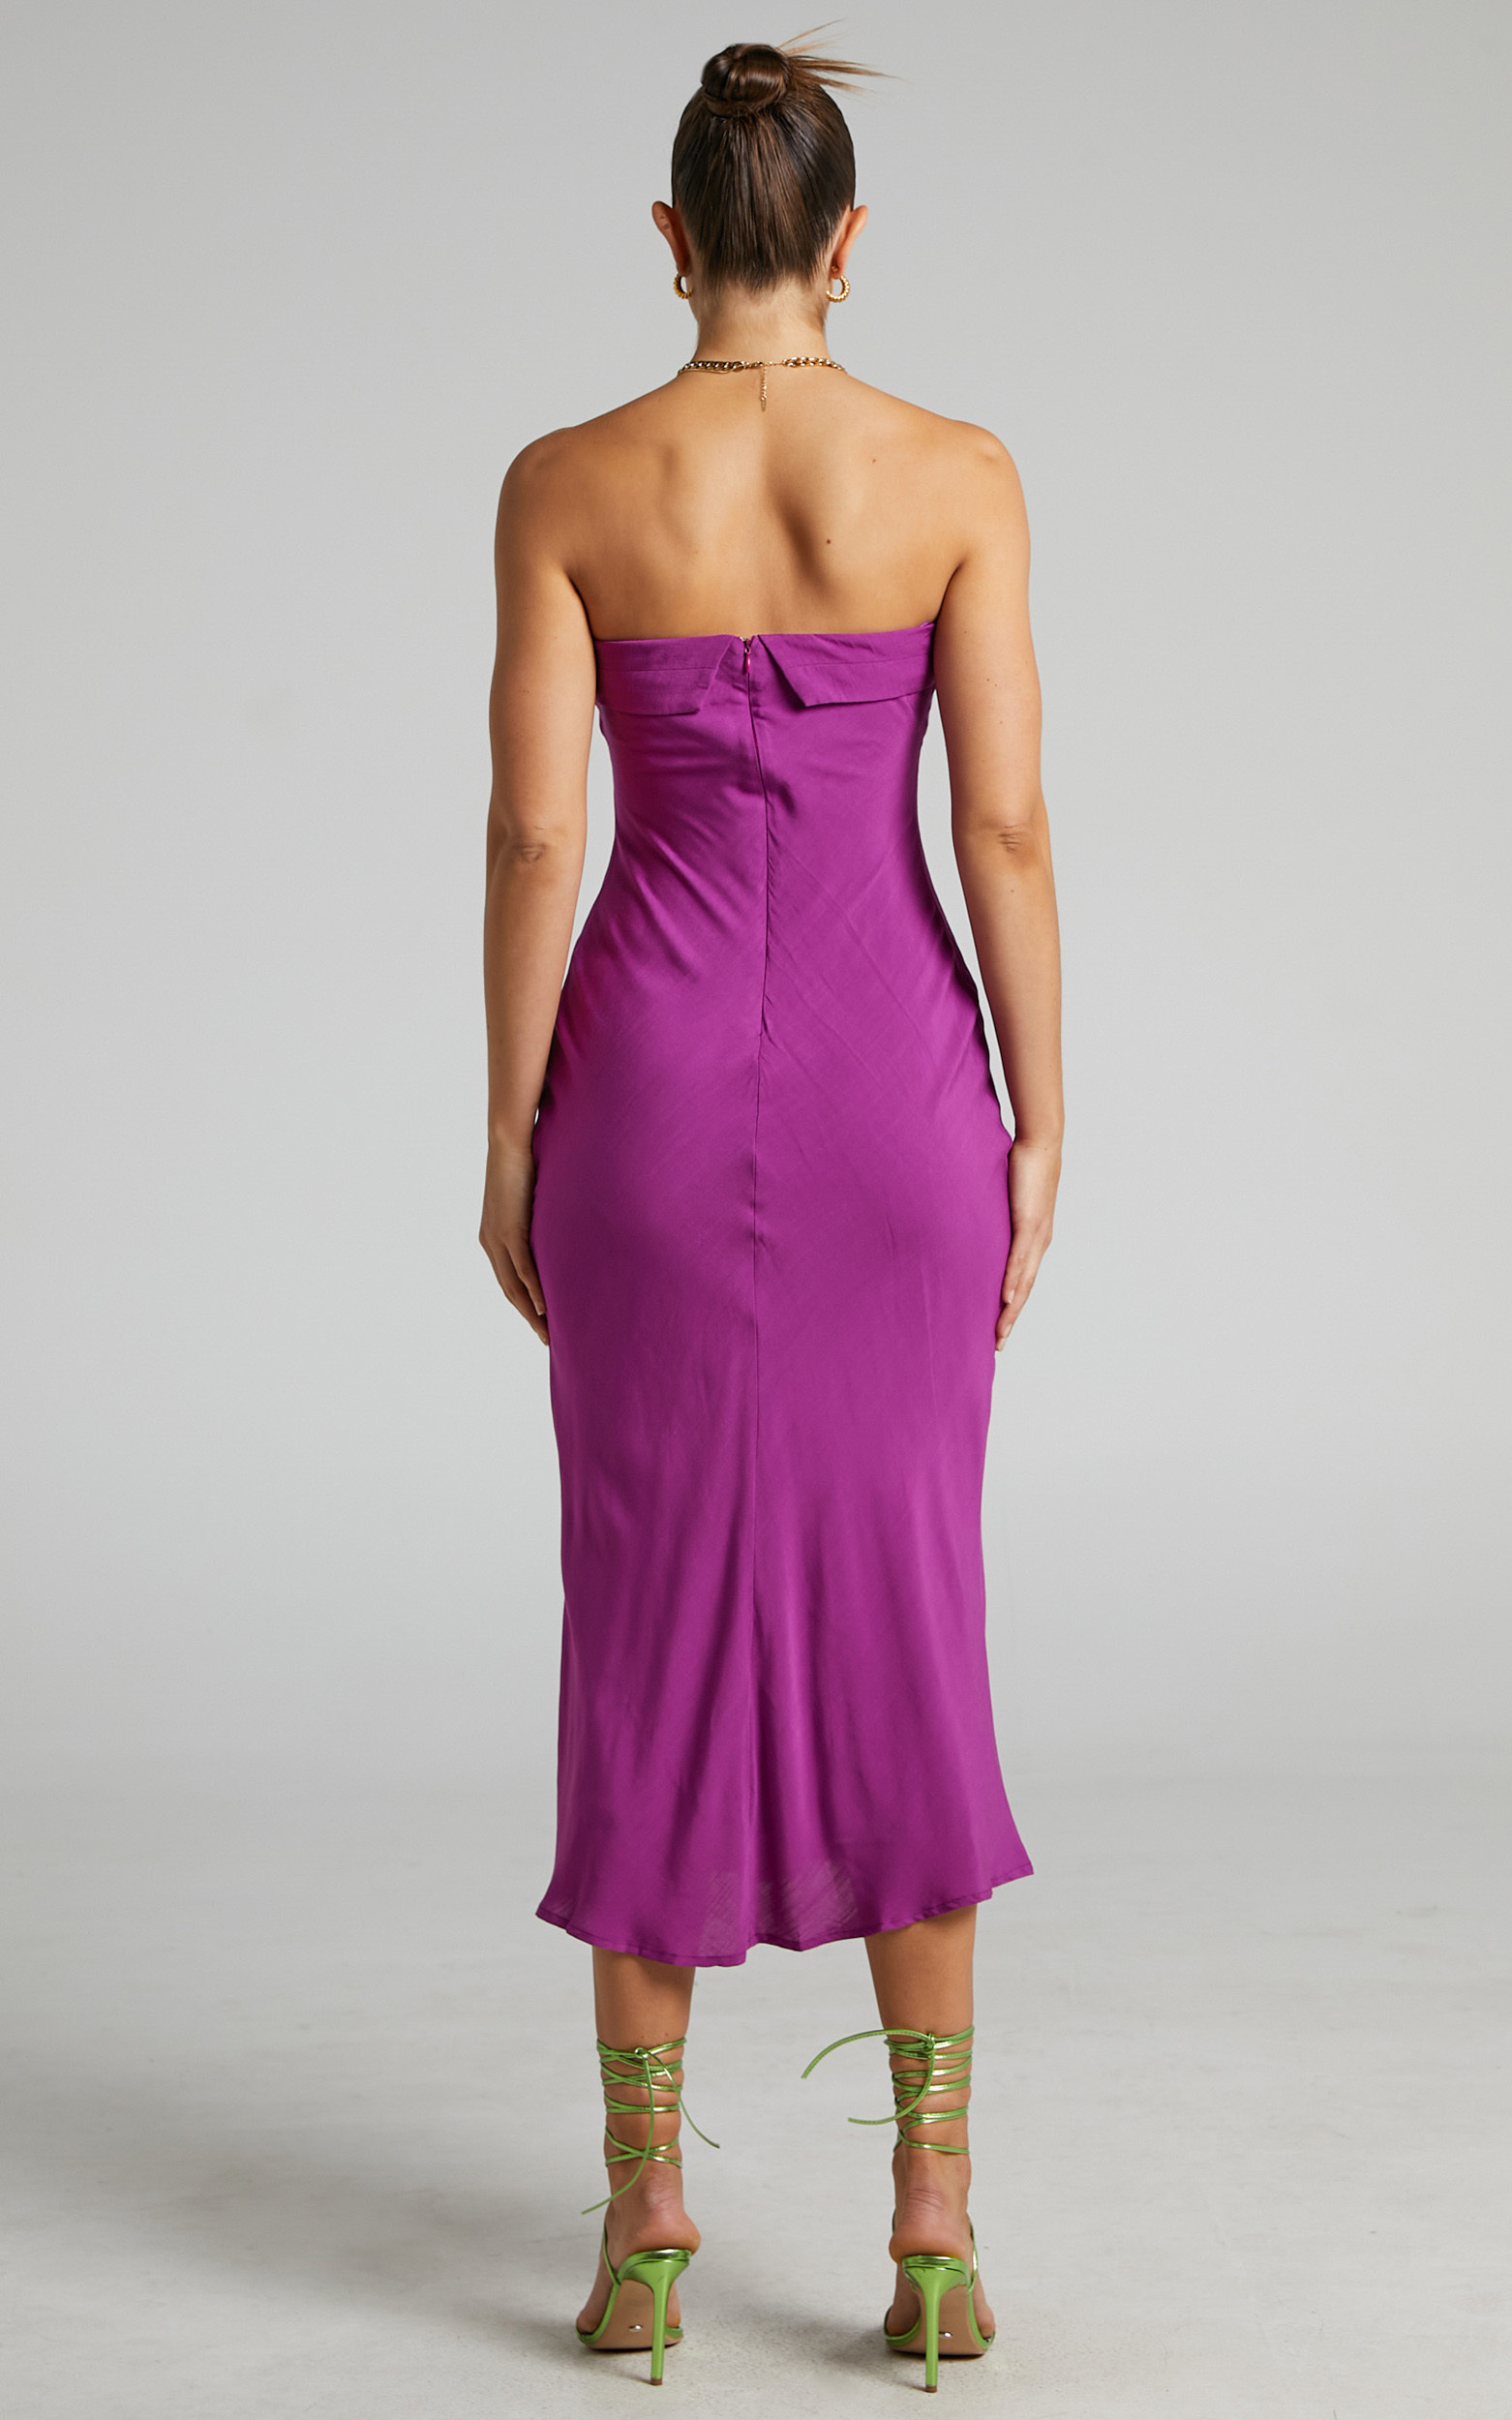 Runaway The Label - Leila Rayon Strapless Midi Dress in Orchid | Showpo USA